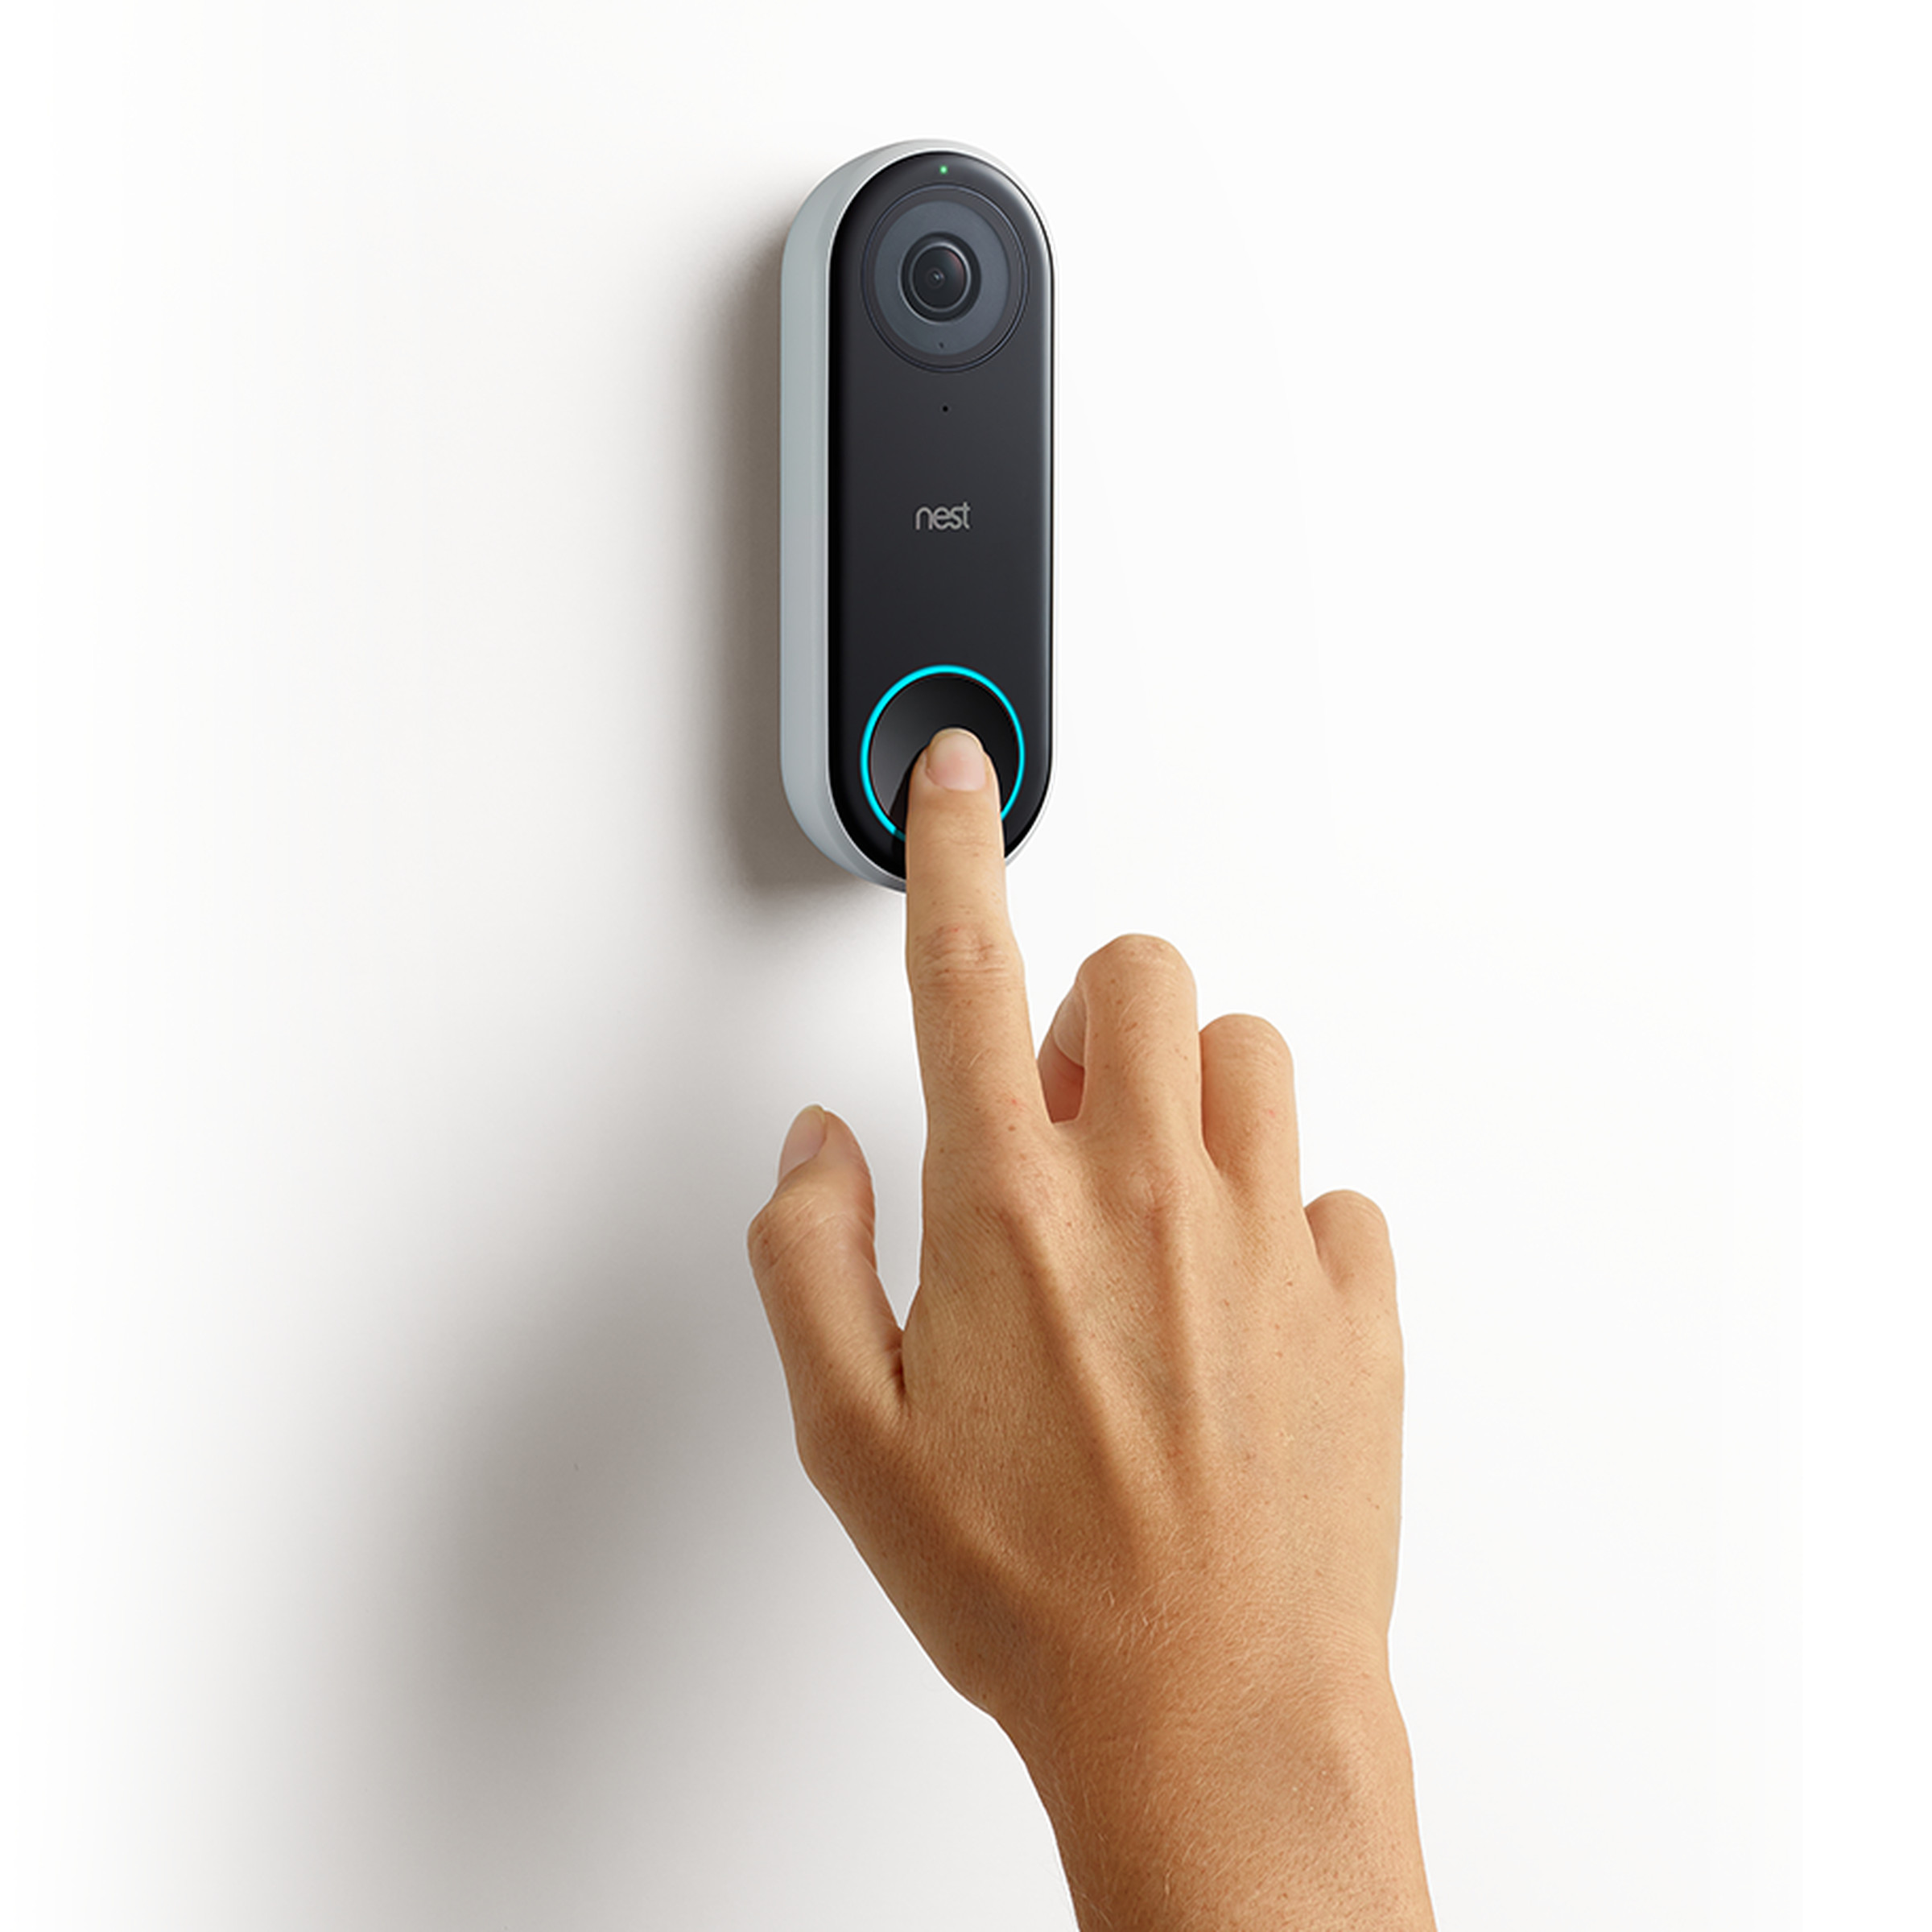 The Nest Hello video doorbell is now shipping as well.